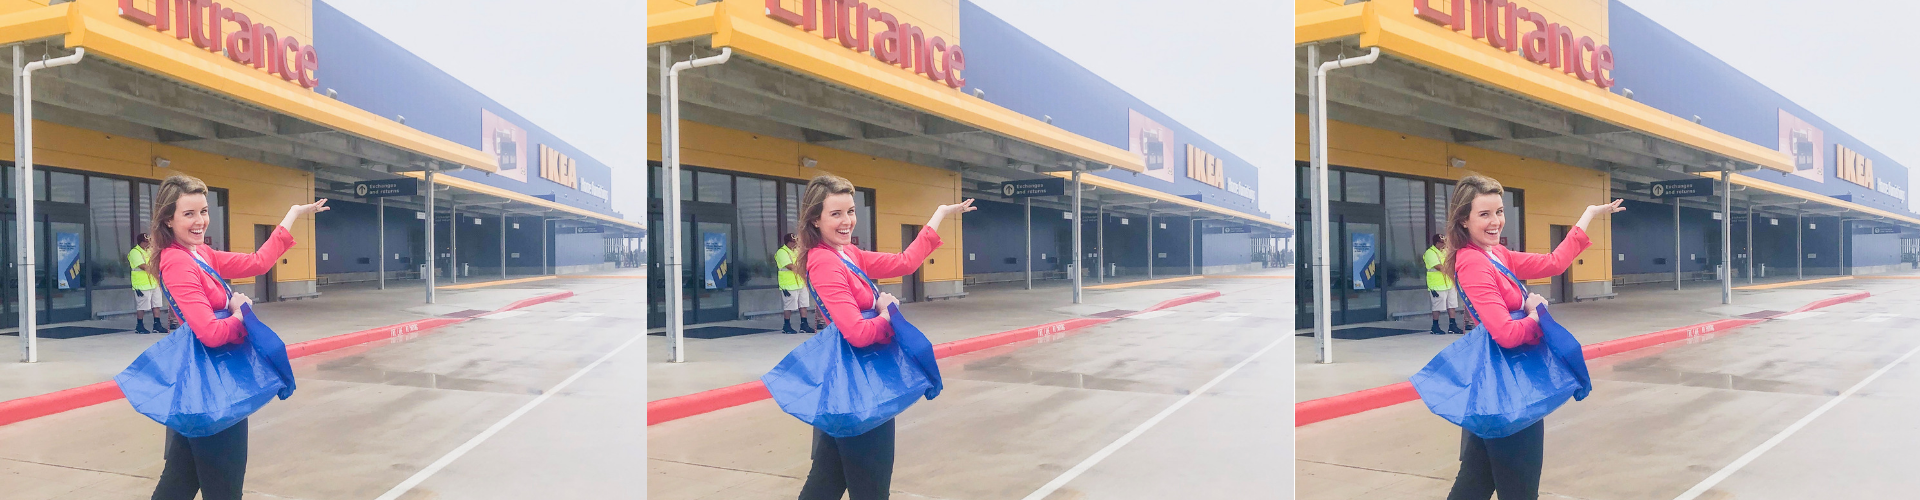 THIS IS NOT A DRILL: IKEA is finally opening in San Antonio!